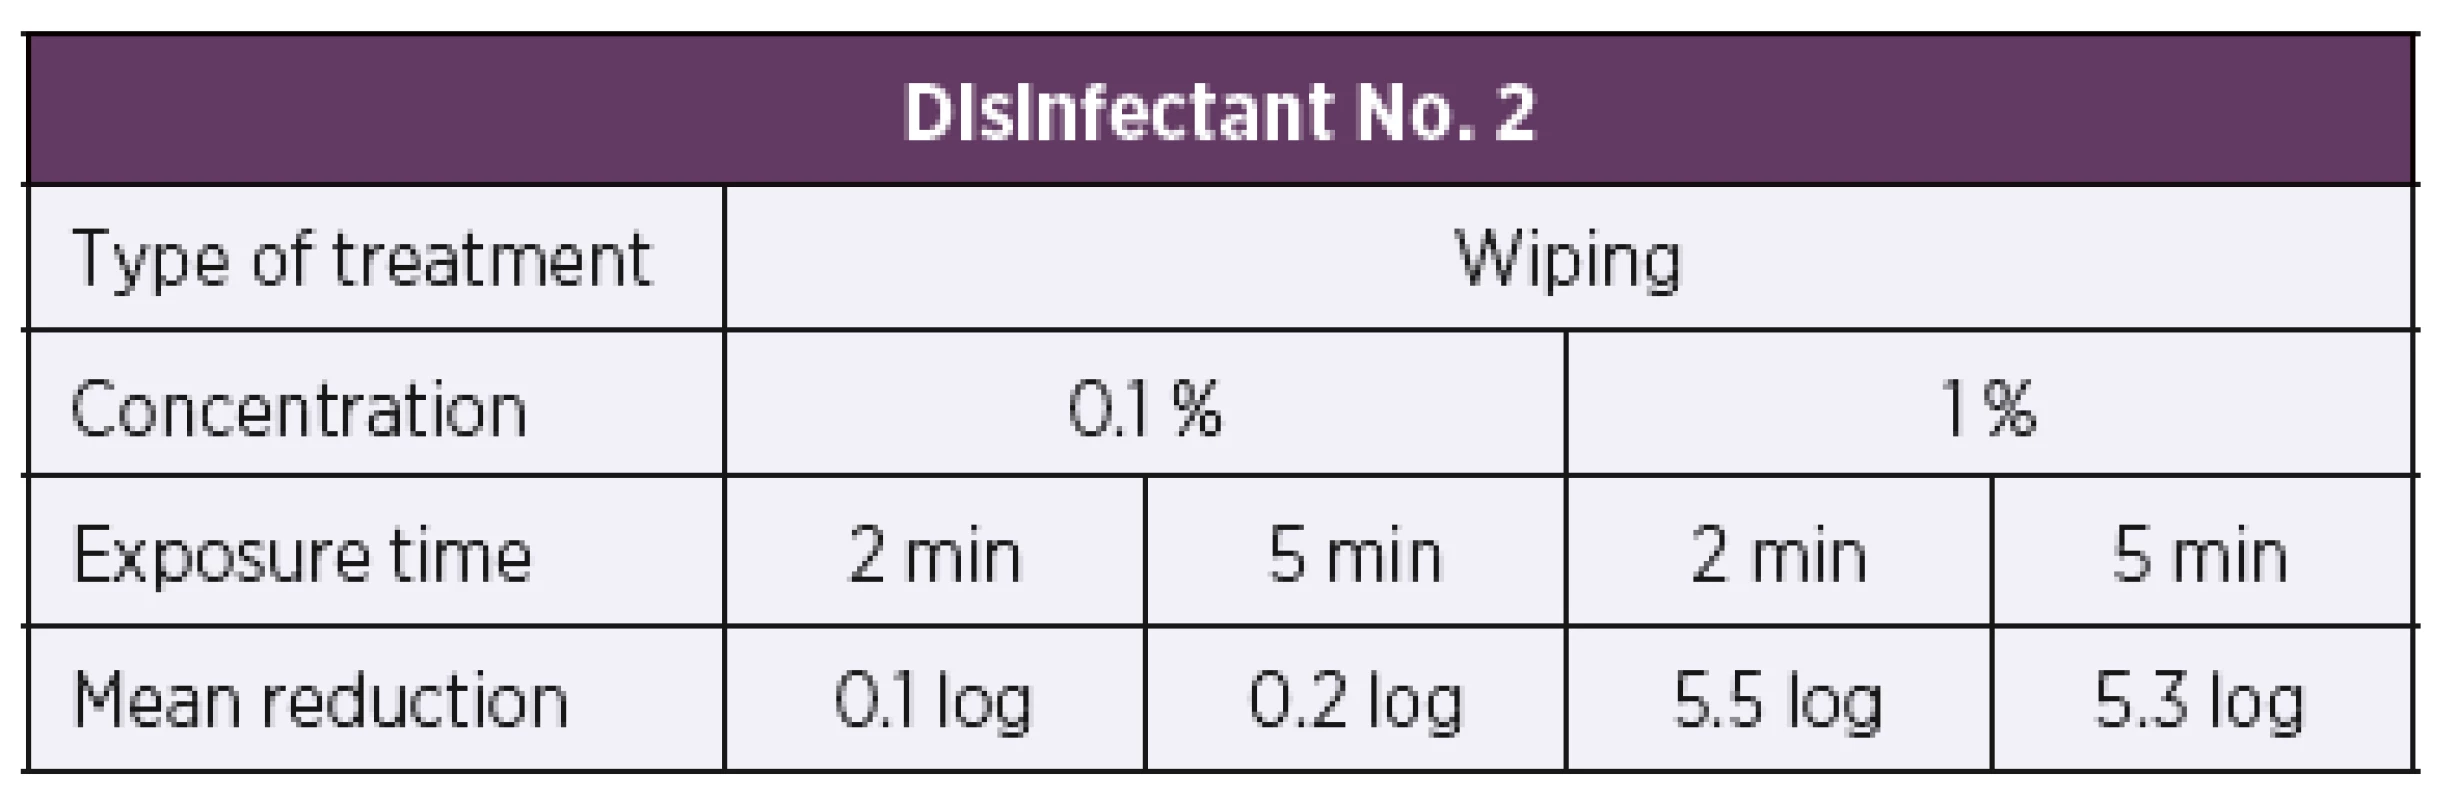 Overview of the mean log reduction in the bacterial counts
achieved using disinfectant No. 2 depending on the concentration
and exposure time when tested by the carrier wiping method